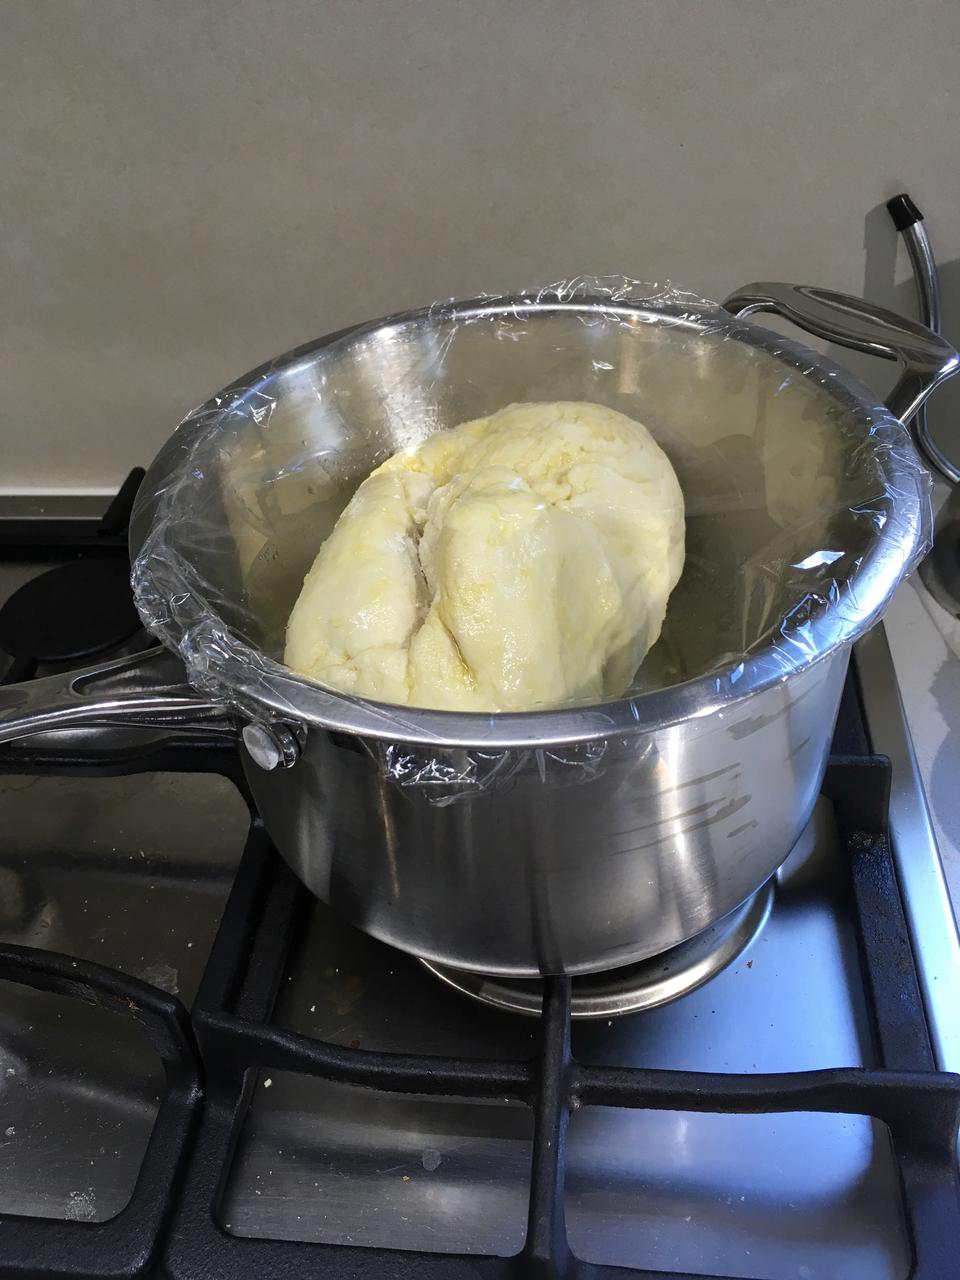 /galleries/food/recipes/Pizza-Goodness/dough-in-pot-rising.jpg